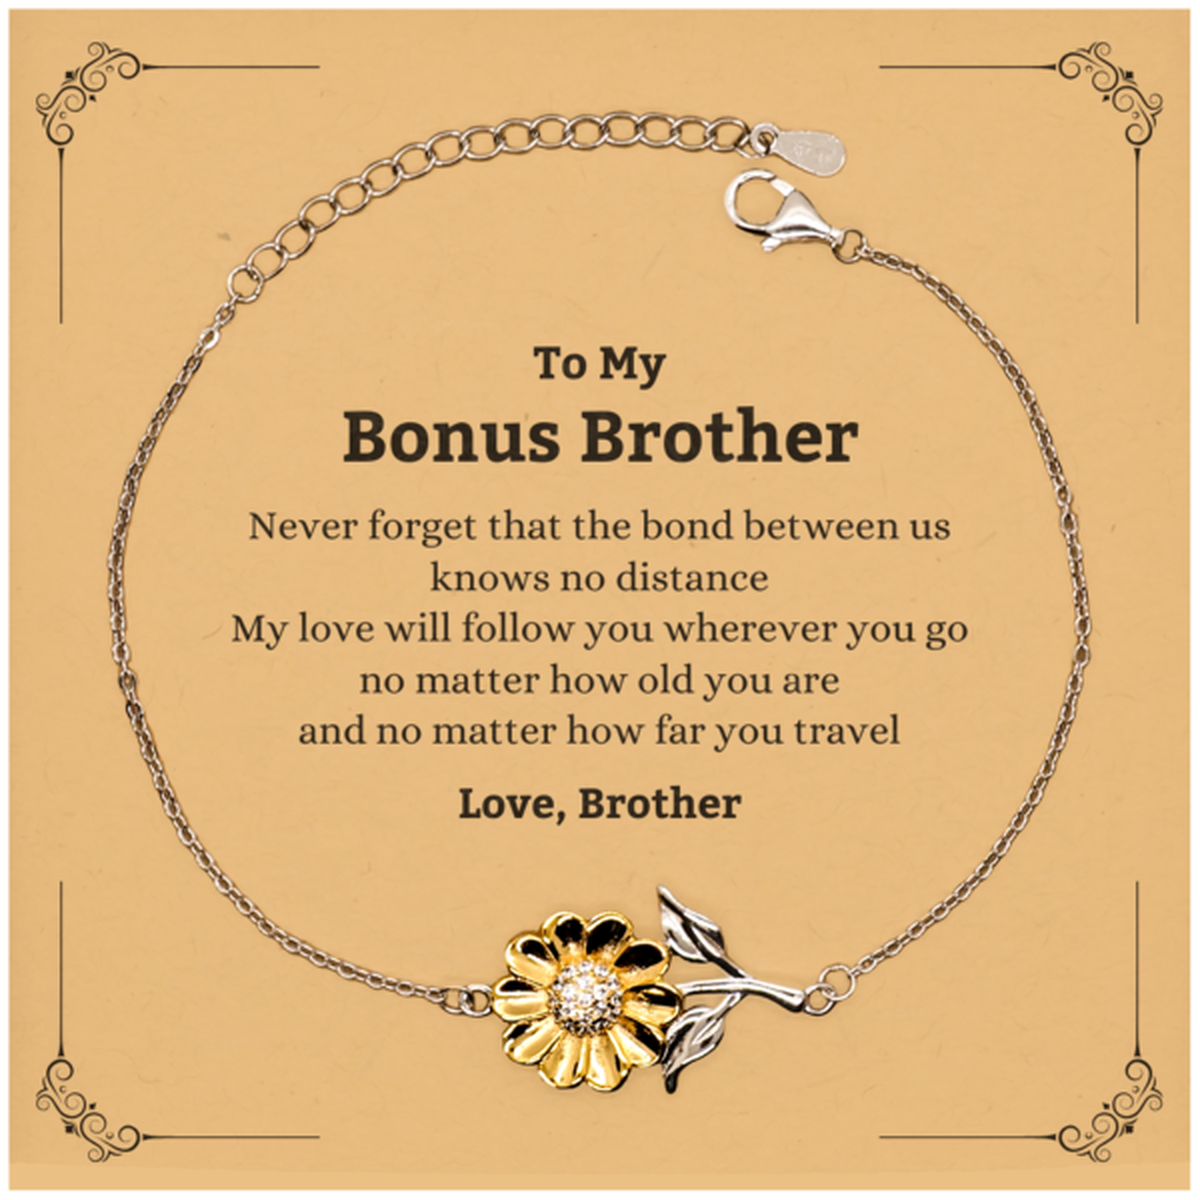 Bonus Brother Birthday Gifts from Brother, Adjustable Sunflower Bracelet for Bonus Brother Christmas Graduation Unique Gifts Bonus Brother Never forget that the bond between us knows no distance. Love, Brother